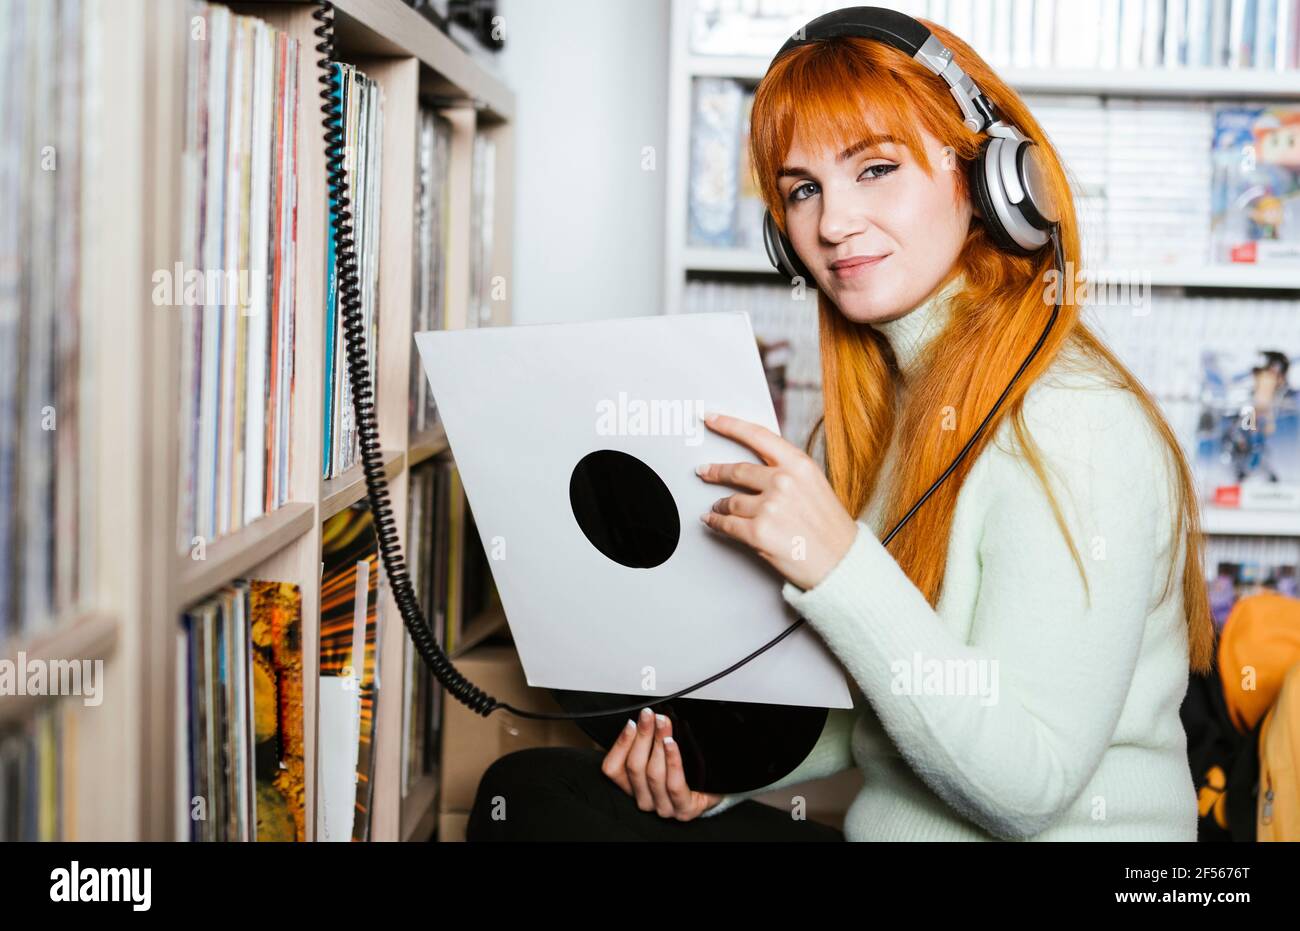 Smiling woman with headphones listening music while holding record at music store Stock Photo